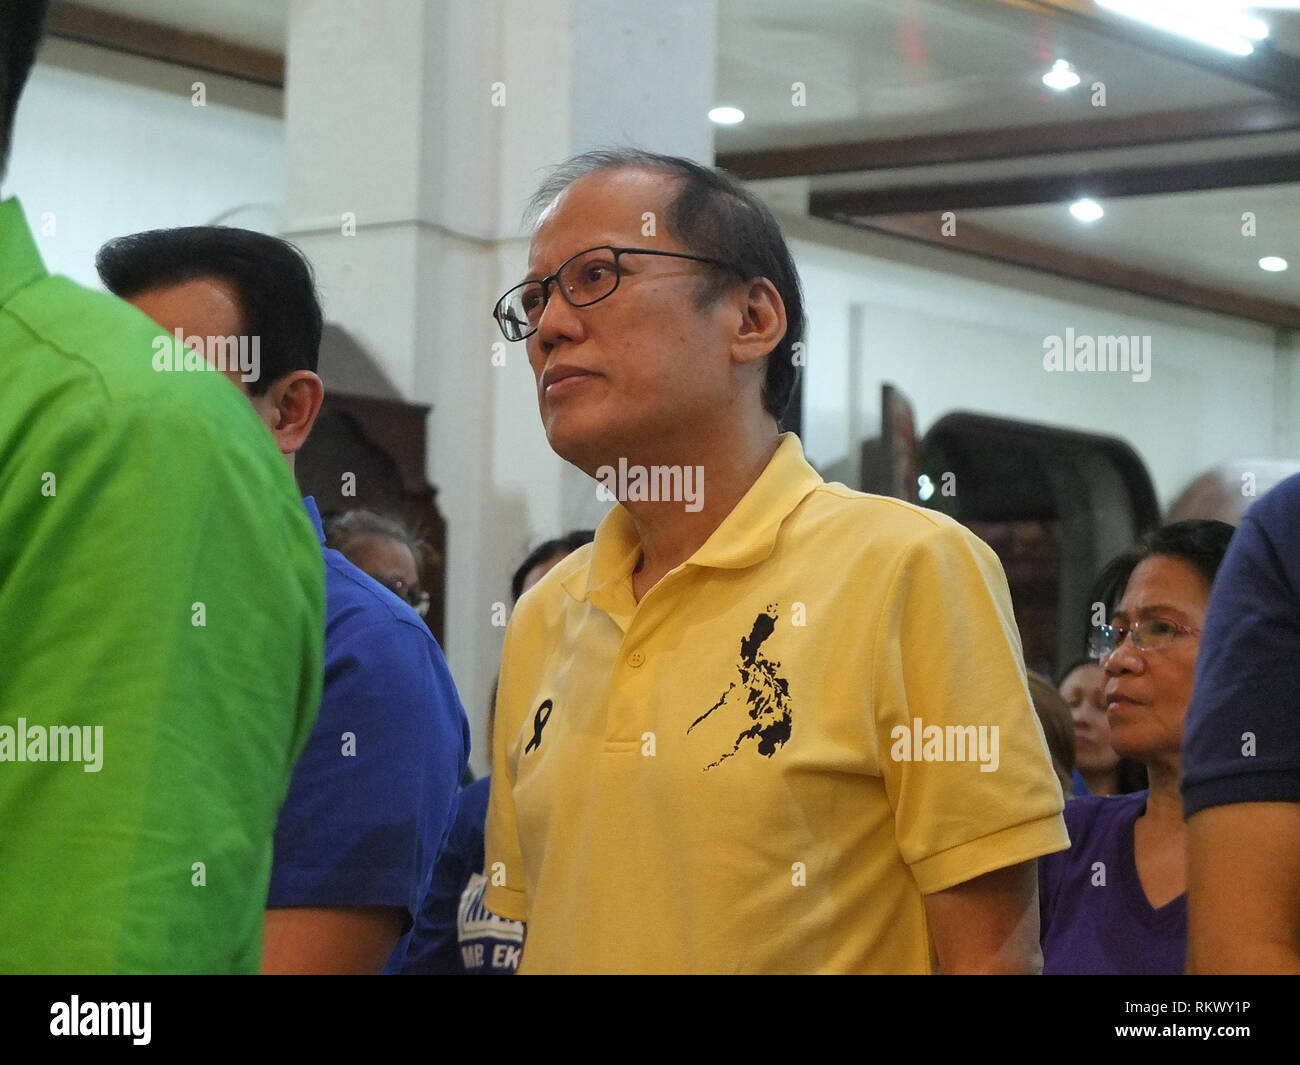 Former President Benigno 'Noynoy' Aquino III seen joining the opposition slate in a mass sponsored by the Otso Diretso coalition in Caloocan City. The Opposition Senatorial candidates, known as 'Otso Diretso' (means vote straight the 8 senatorial bets) kicked off their campaigns in Caloocan City. The Senatorial slate composed of experienced but relatively unknown opposition bets appeal to voting population that still supports the ruling Duterte Administration. Stock Photo